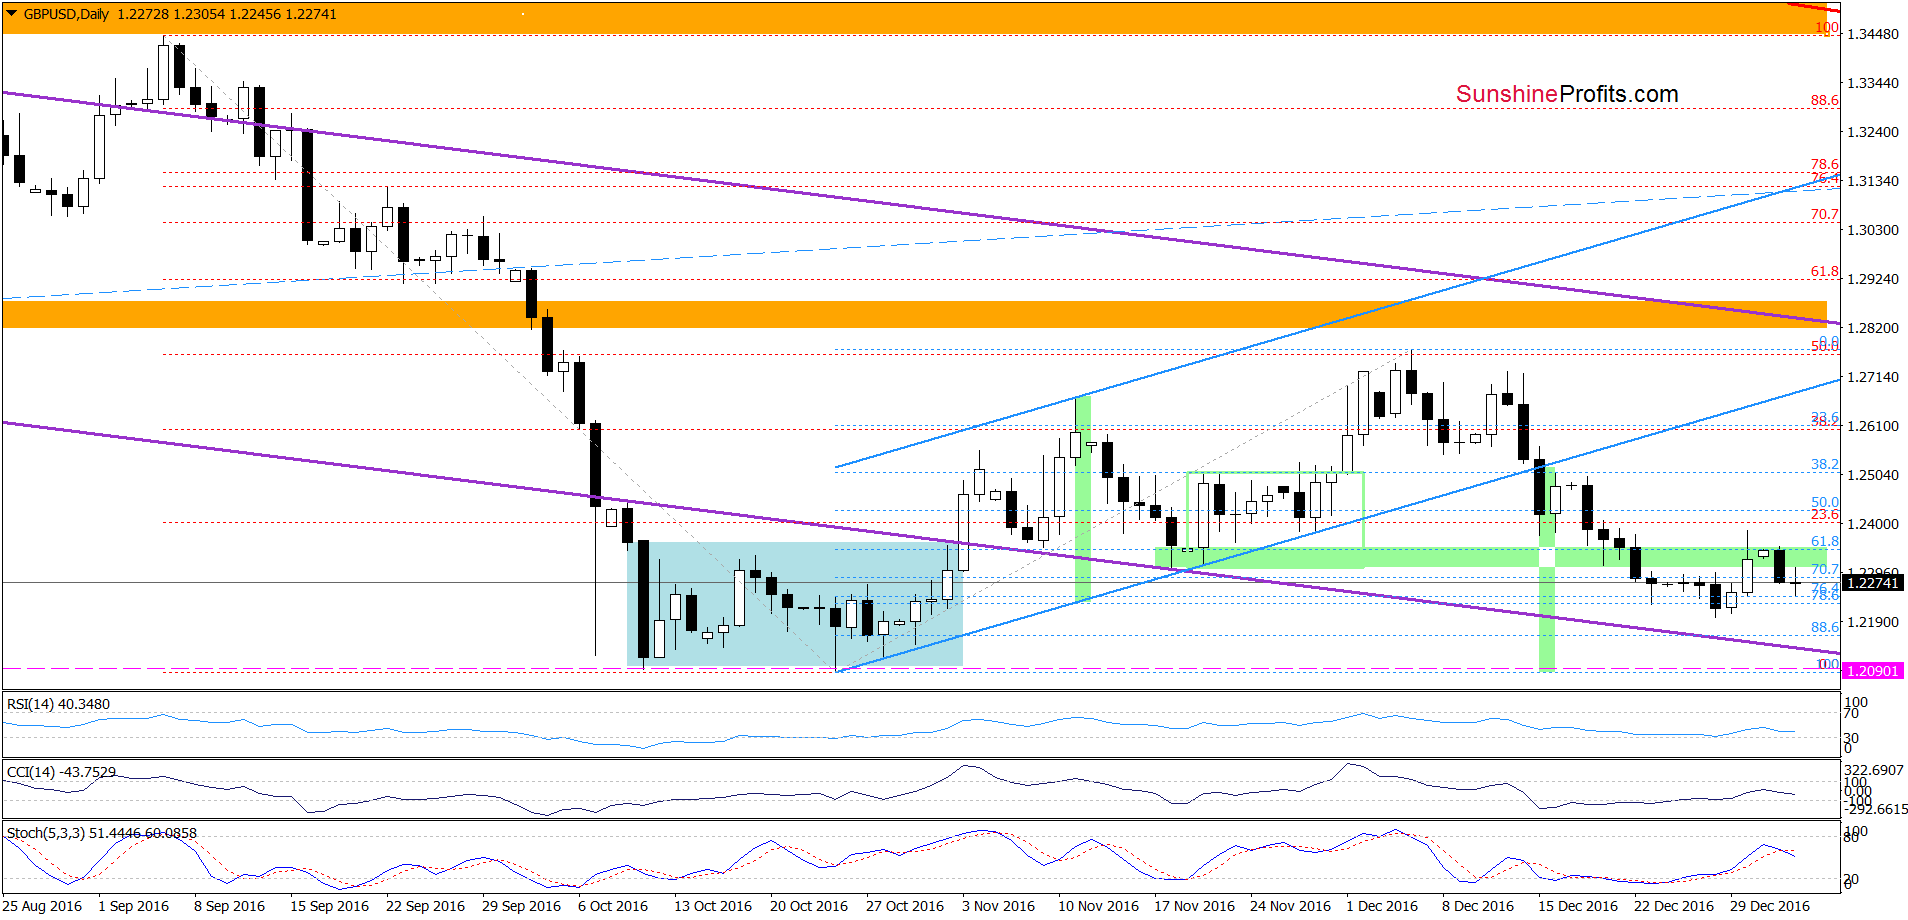 GBP/USD - the daily chart